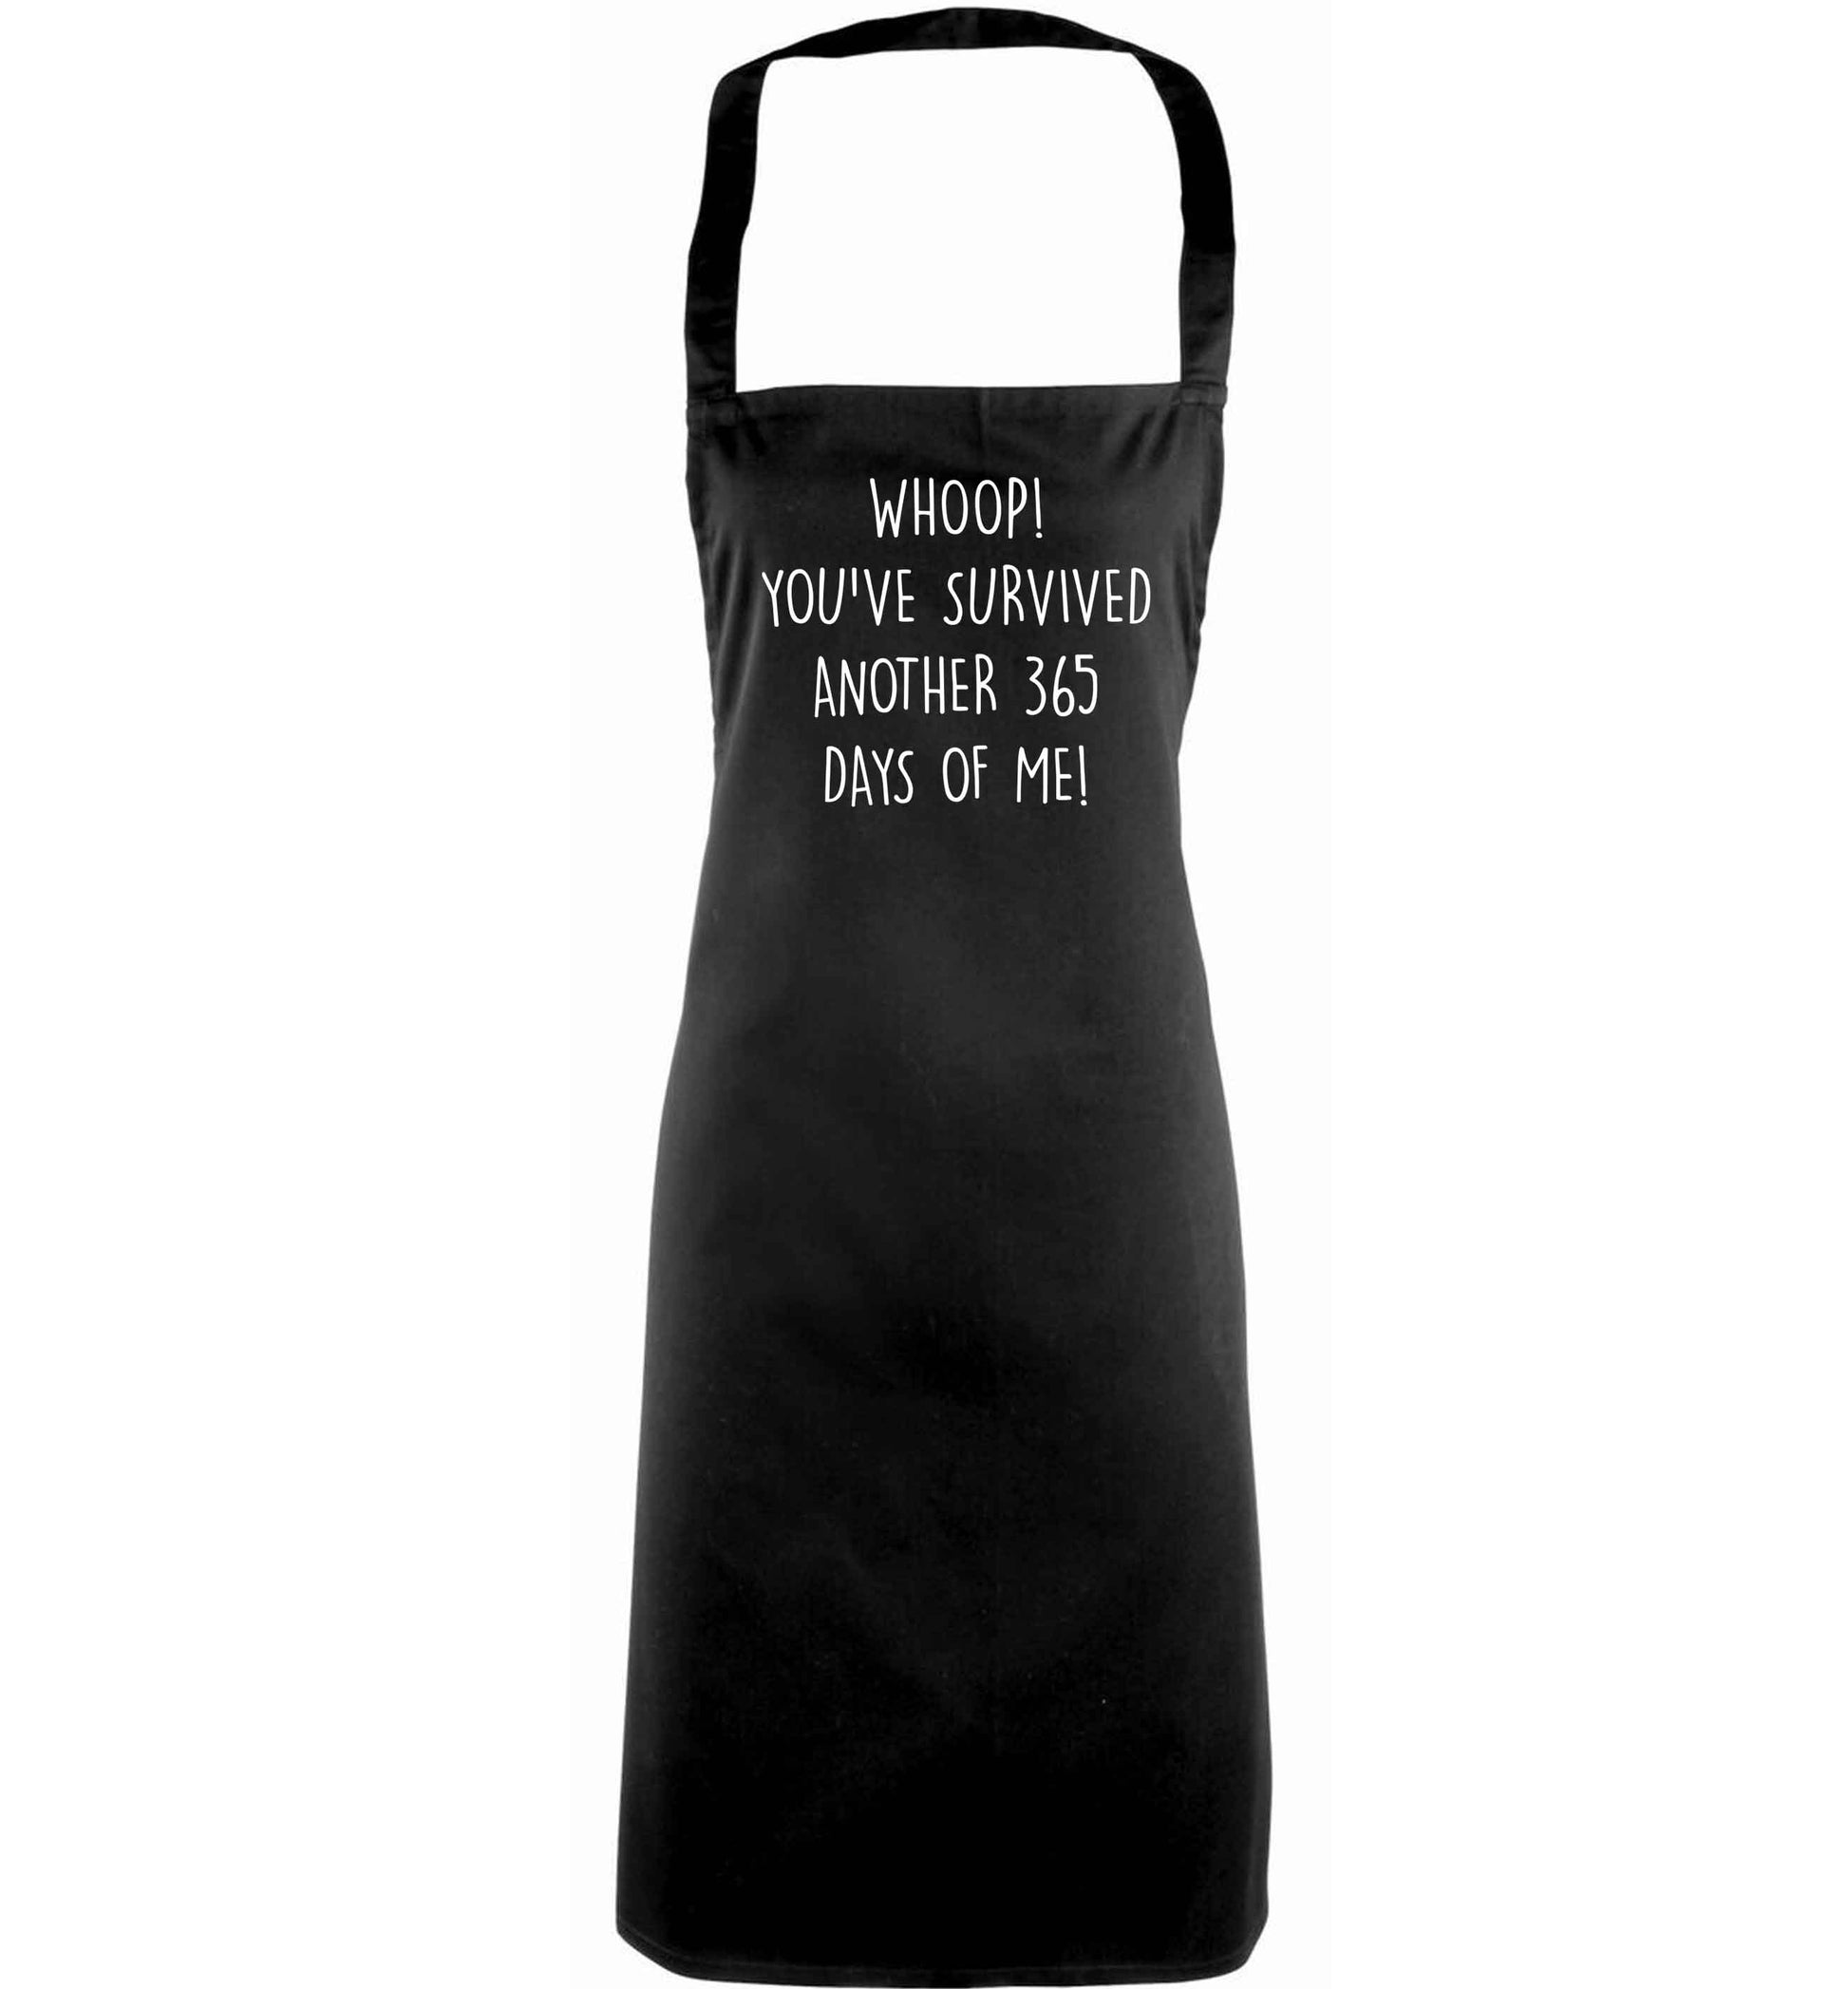 Whoop! You've survived another 365 days with me! adults black apron